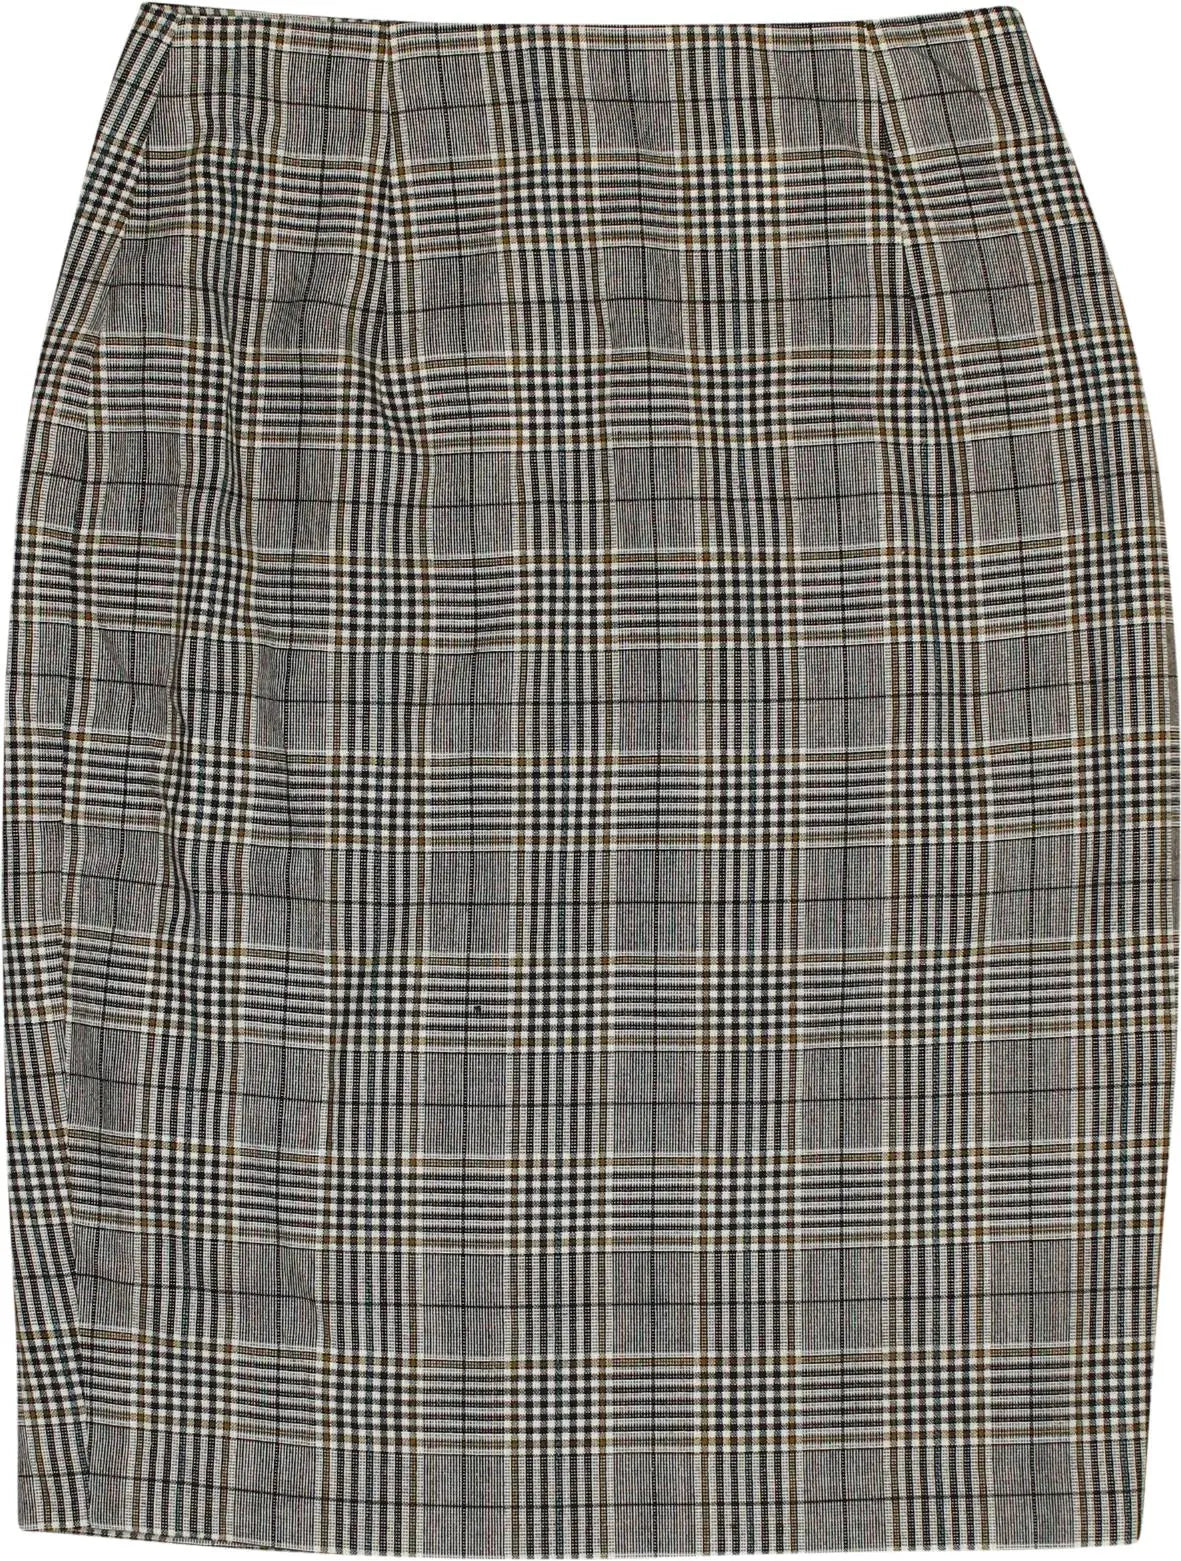 Unknown - Checkered midi skirt- ThriftTale.com - Vintage and second handclothing